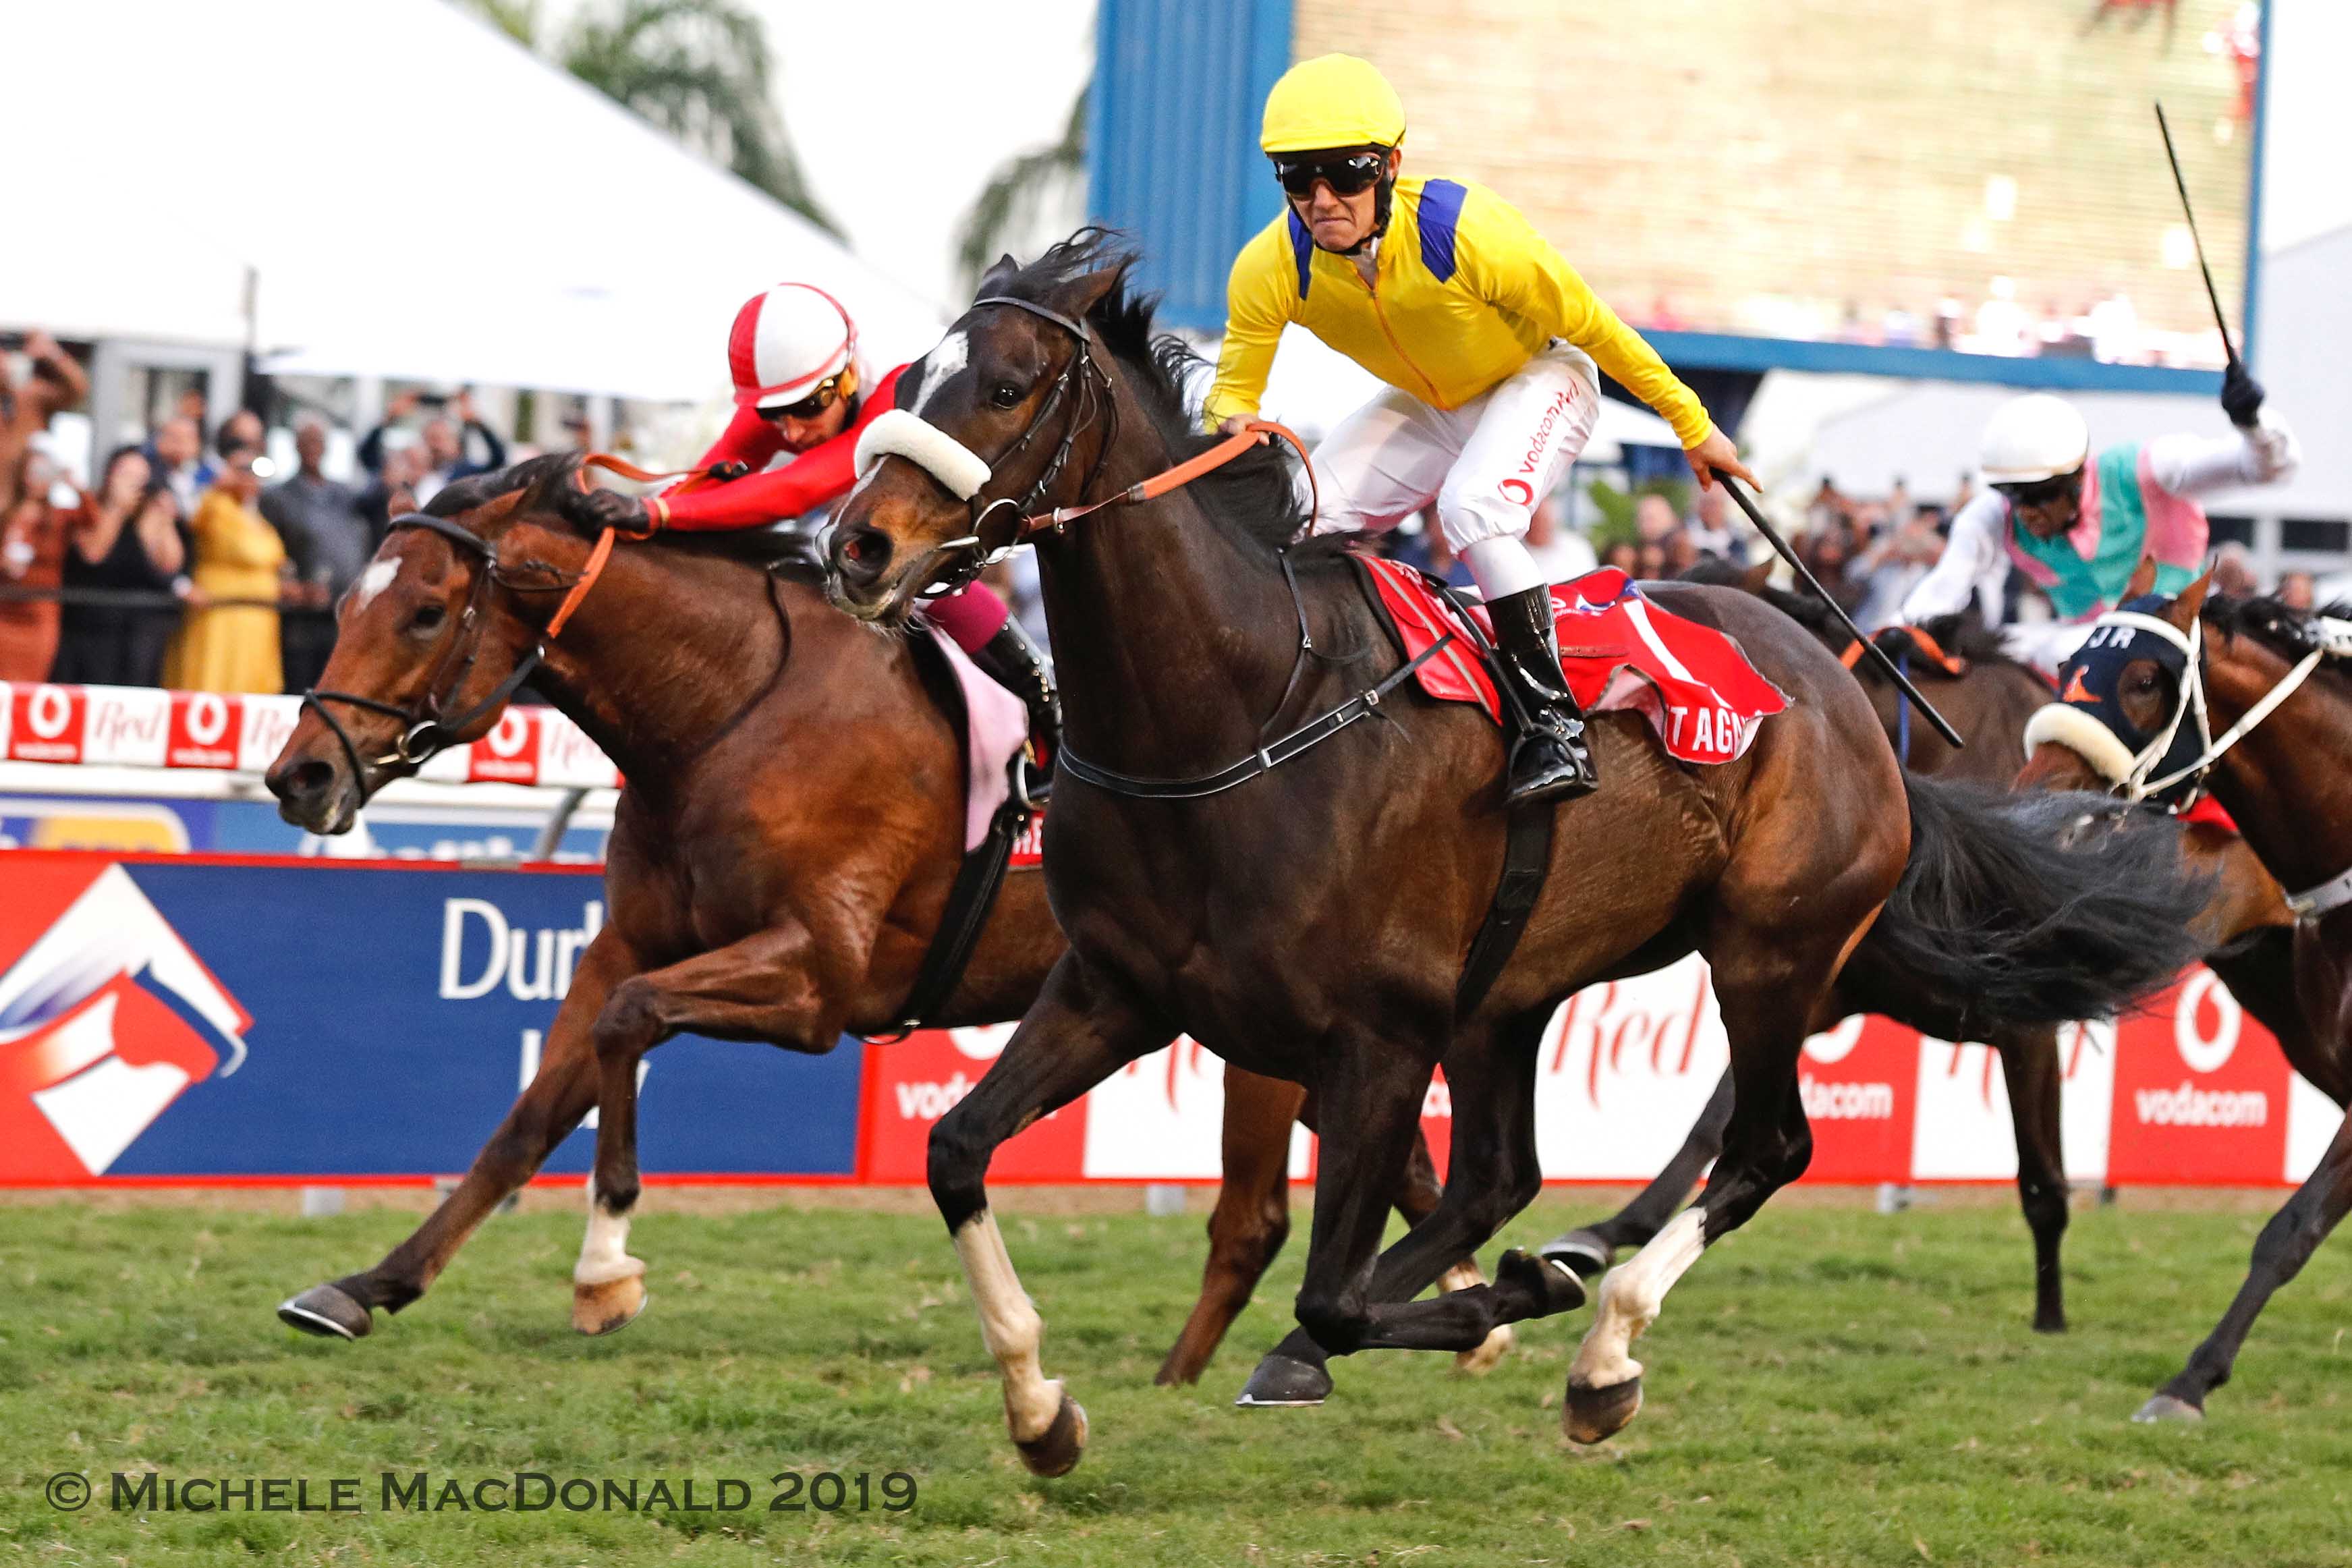 Champion once more: Do It Again and a jubilant Richard Fourie take the Durban July under top weight. Photo: Michele MacDonald